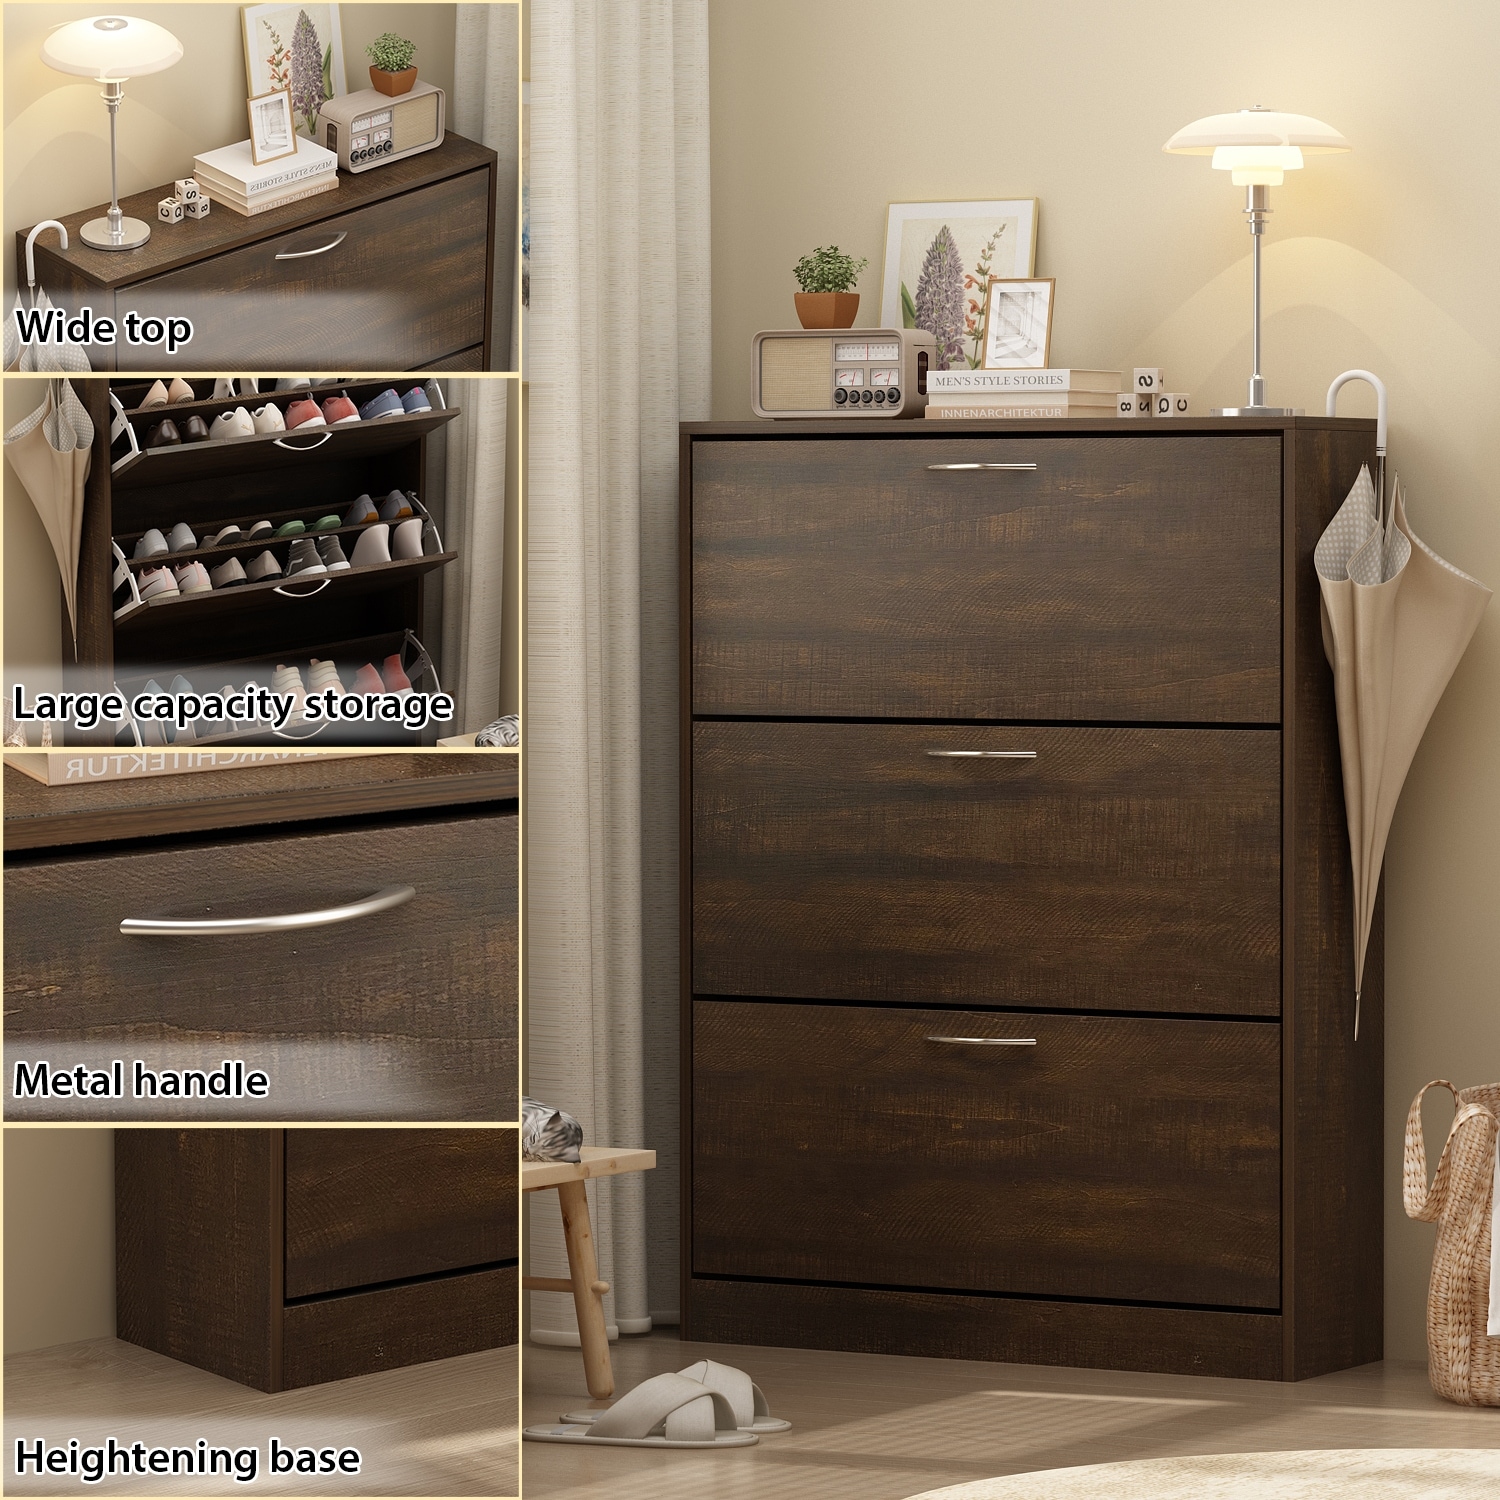 https://ak1.ostkcdn.com/images/products/is/images/direct/291d3d8f04f9eb014d21b7abe4e25818abec1b27/Home-Modern-3-Drawer-Shoe-Cabinet-3-Tier-Shoe-Rack-Storage-Organizer.jpg